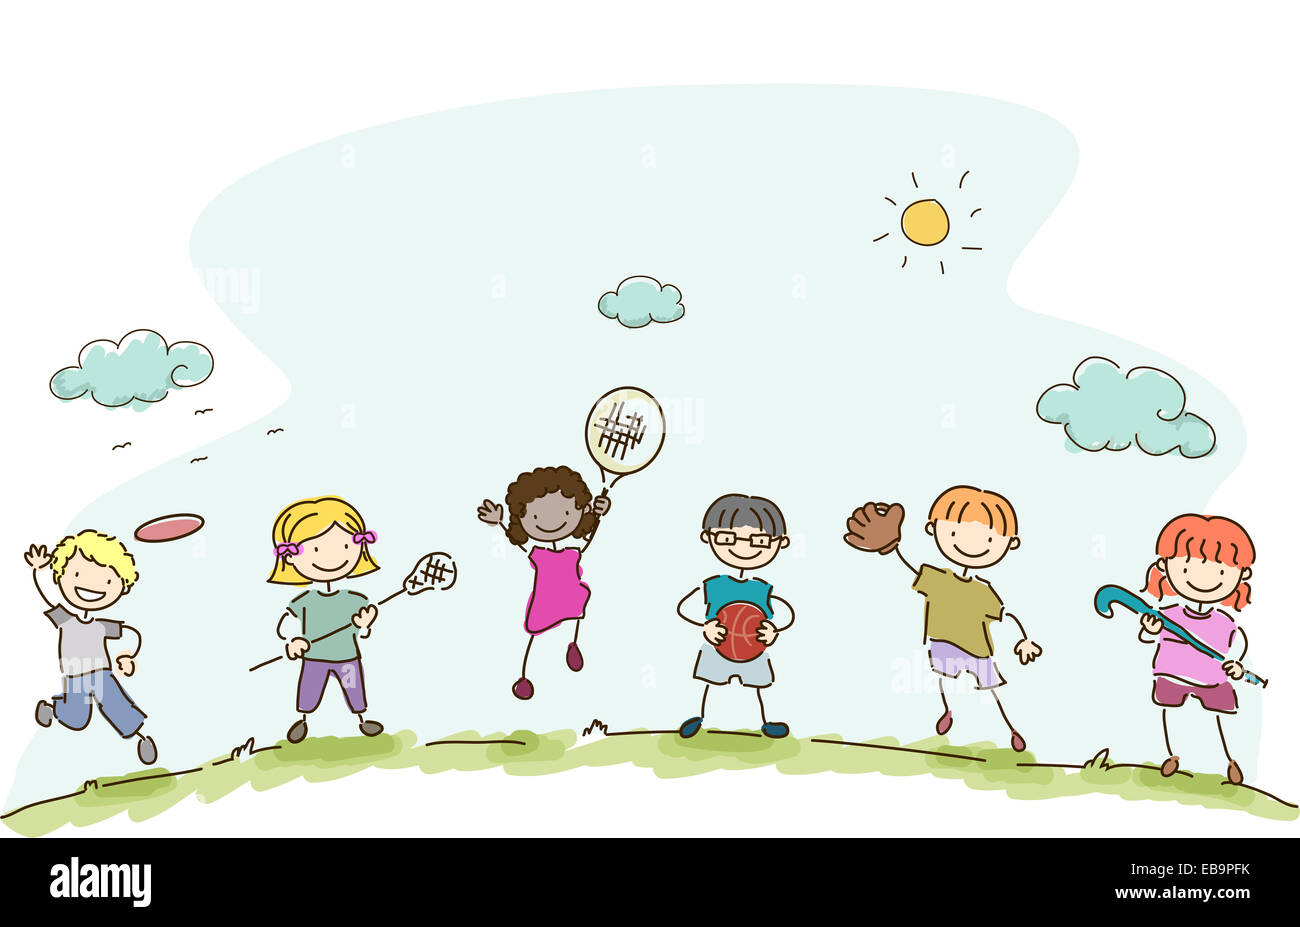 Illustration Featuring Kids Playing Different Sports Stock Photo